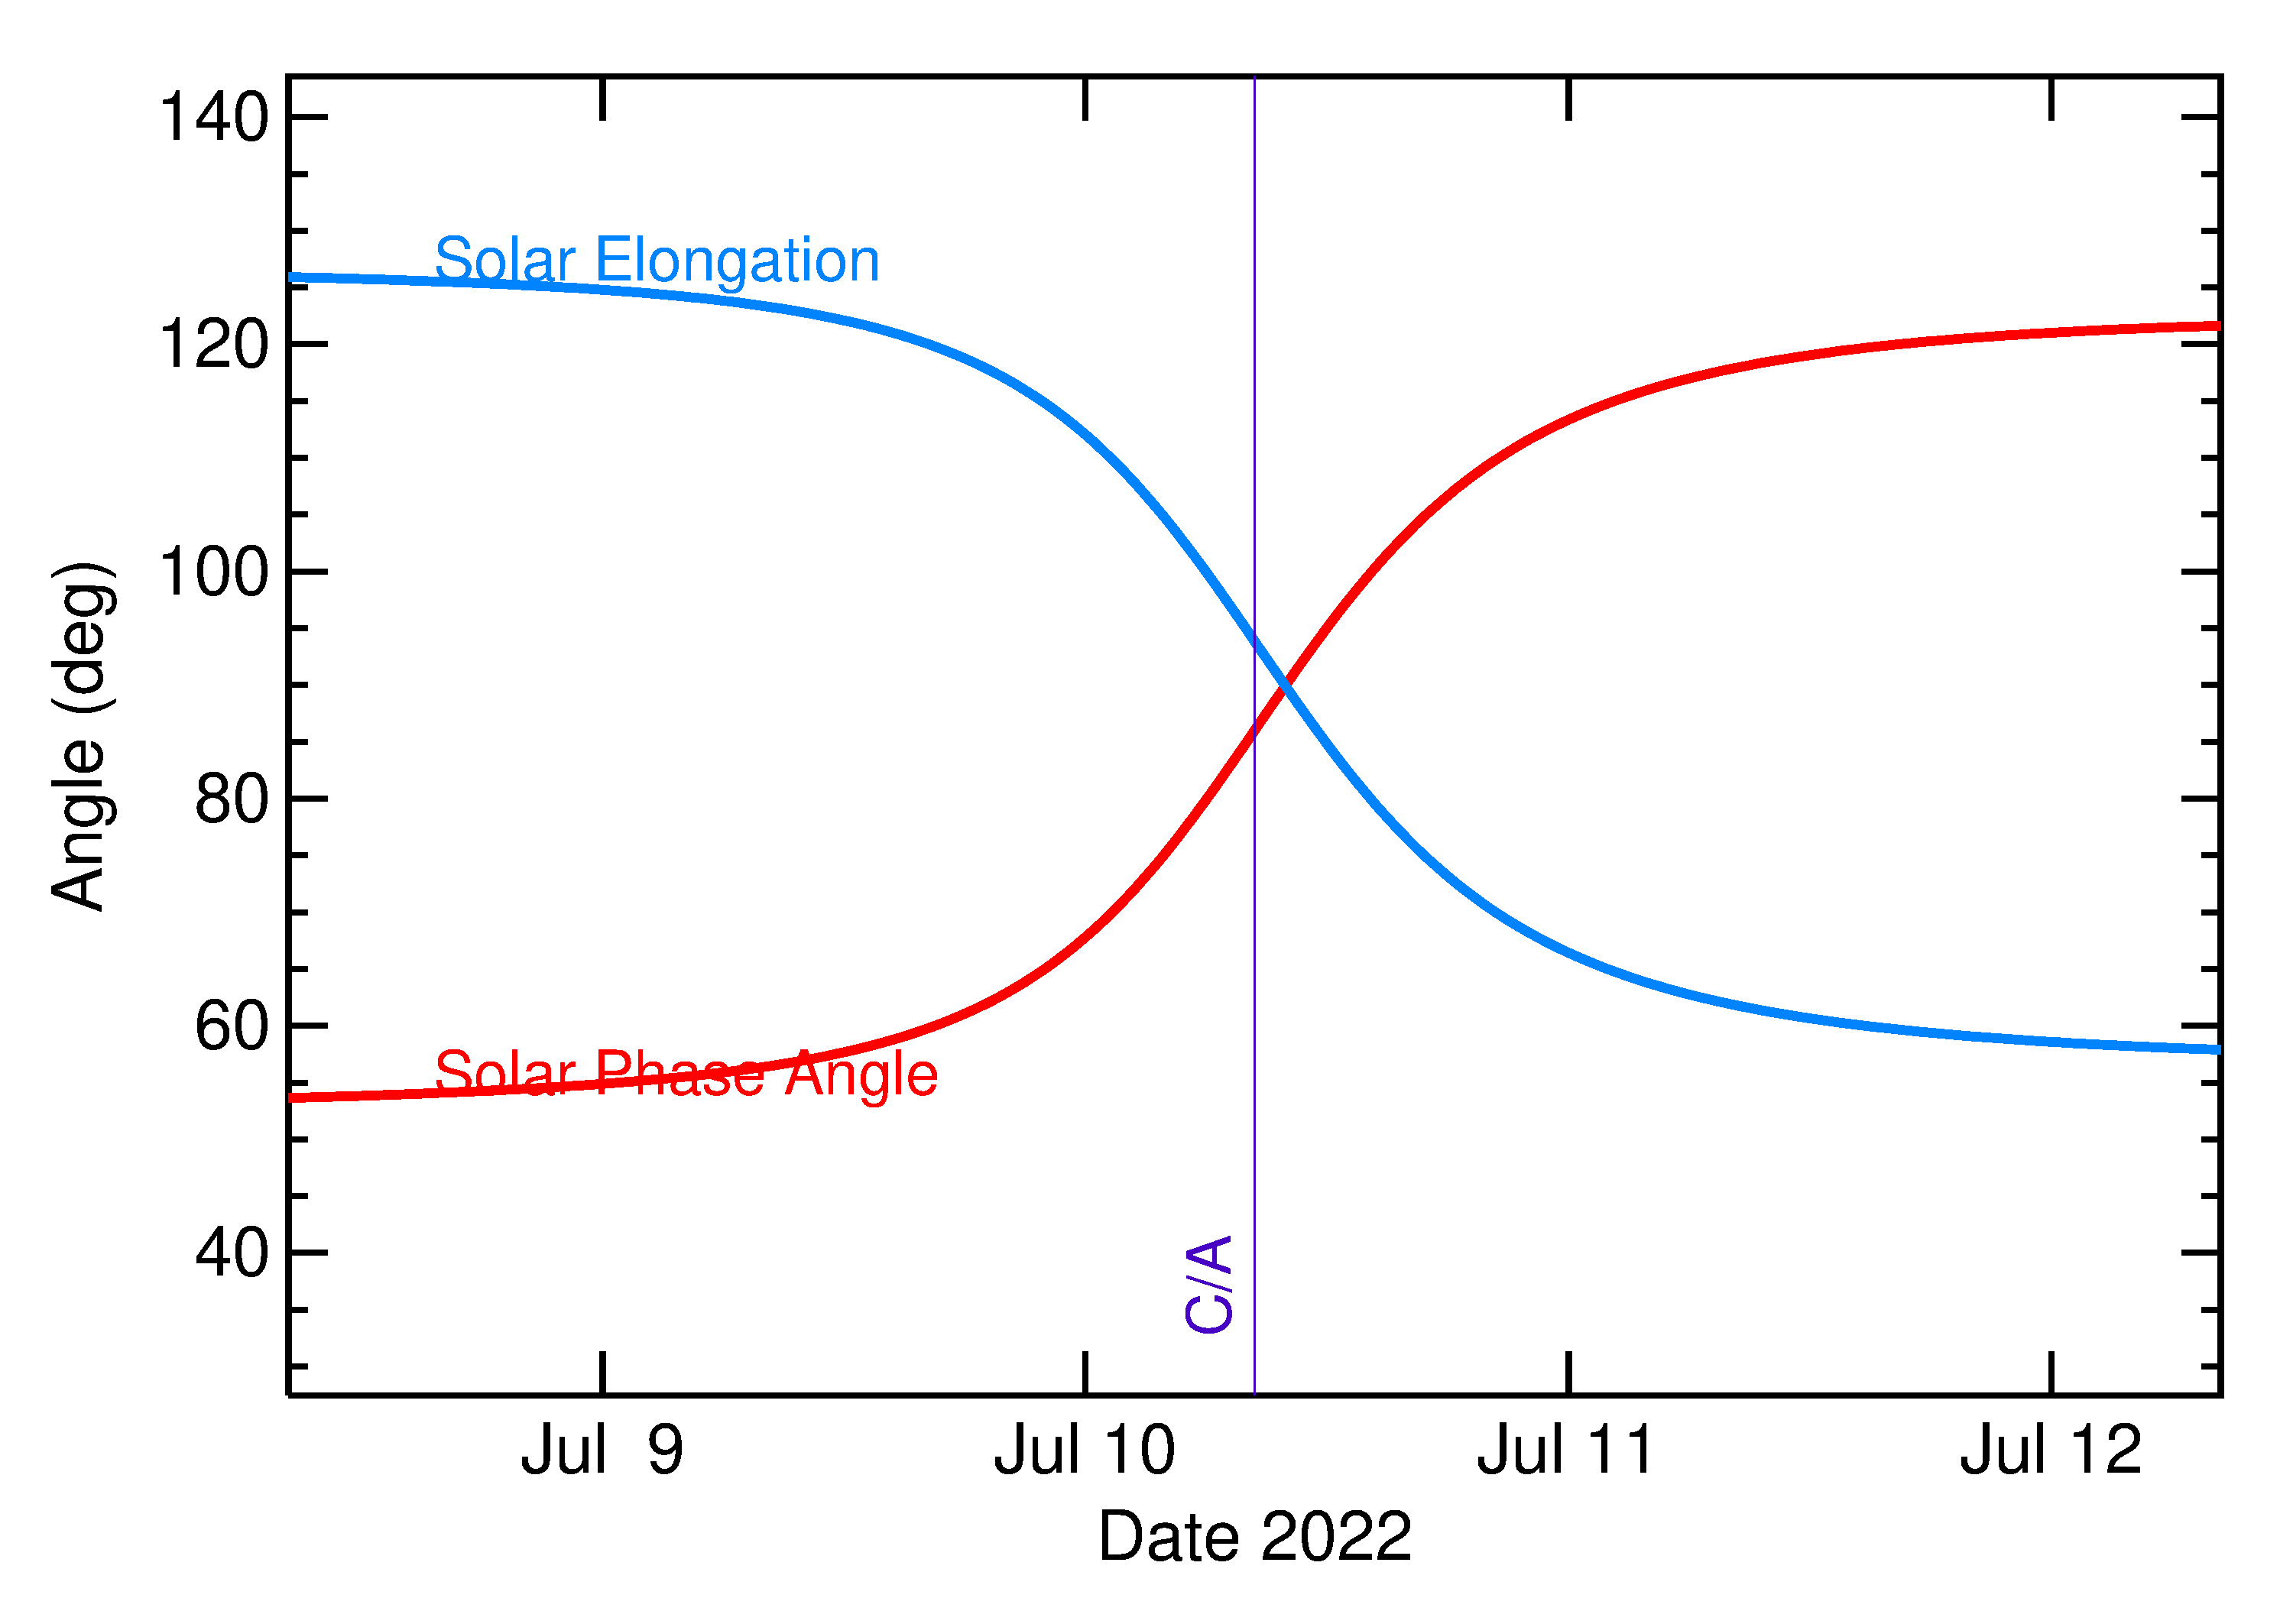 Solar Elongation and Solar Phase Angle of 2022 NR in the days around closest approach